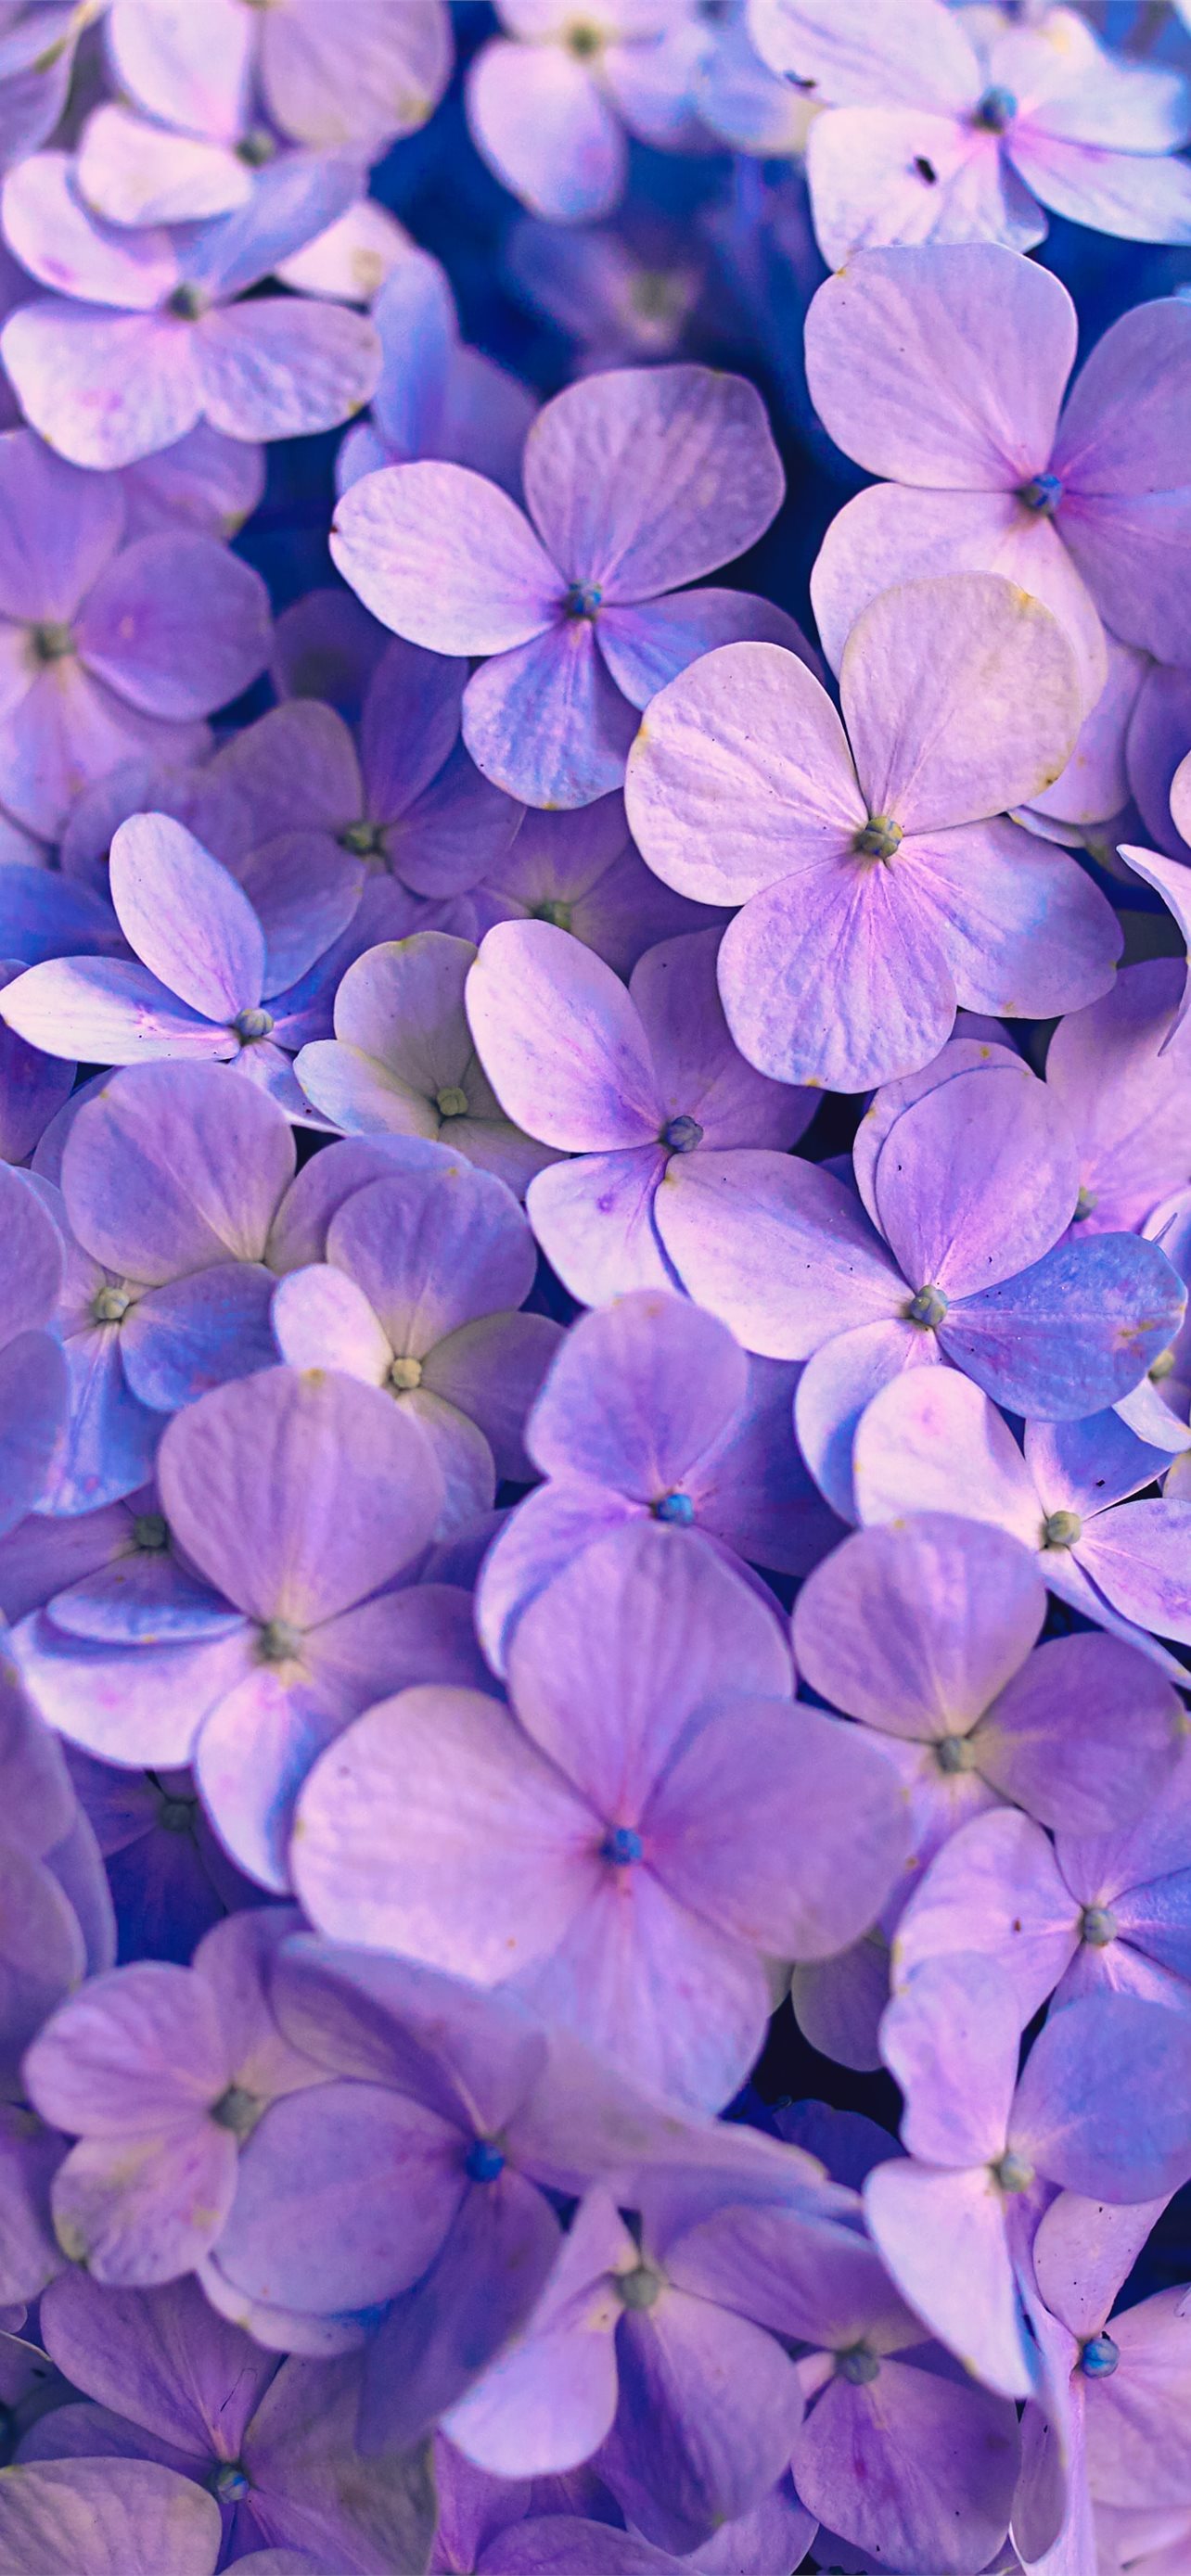 Purple flowers with green leaves iphone wallpapers free download